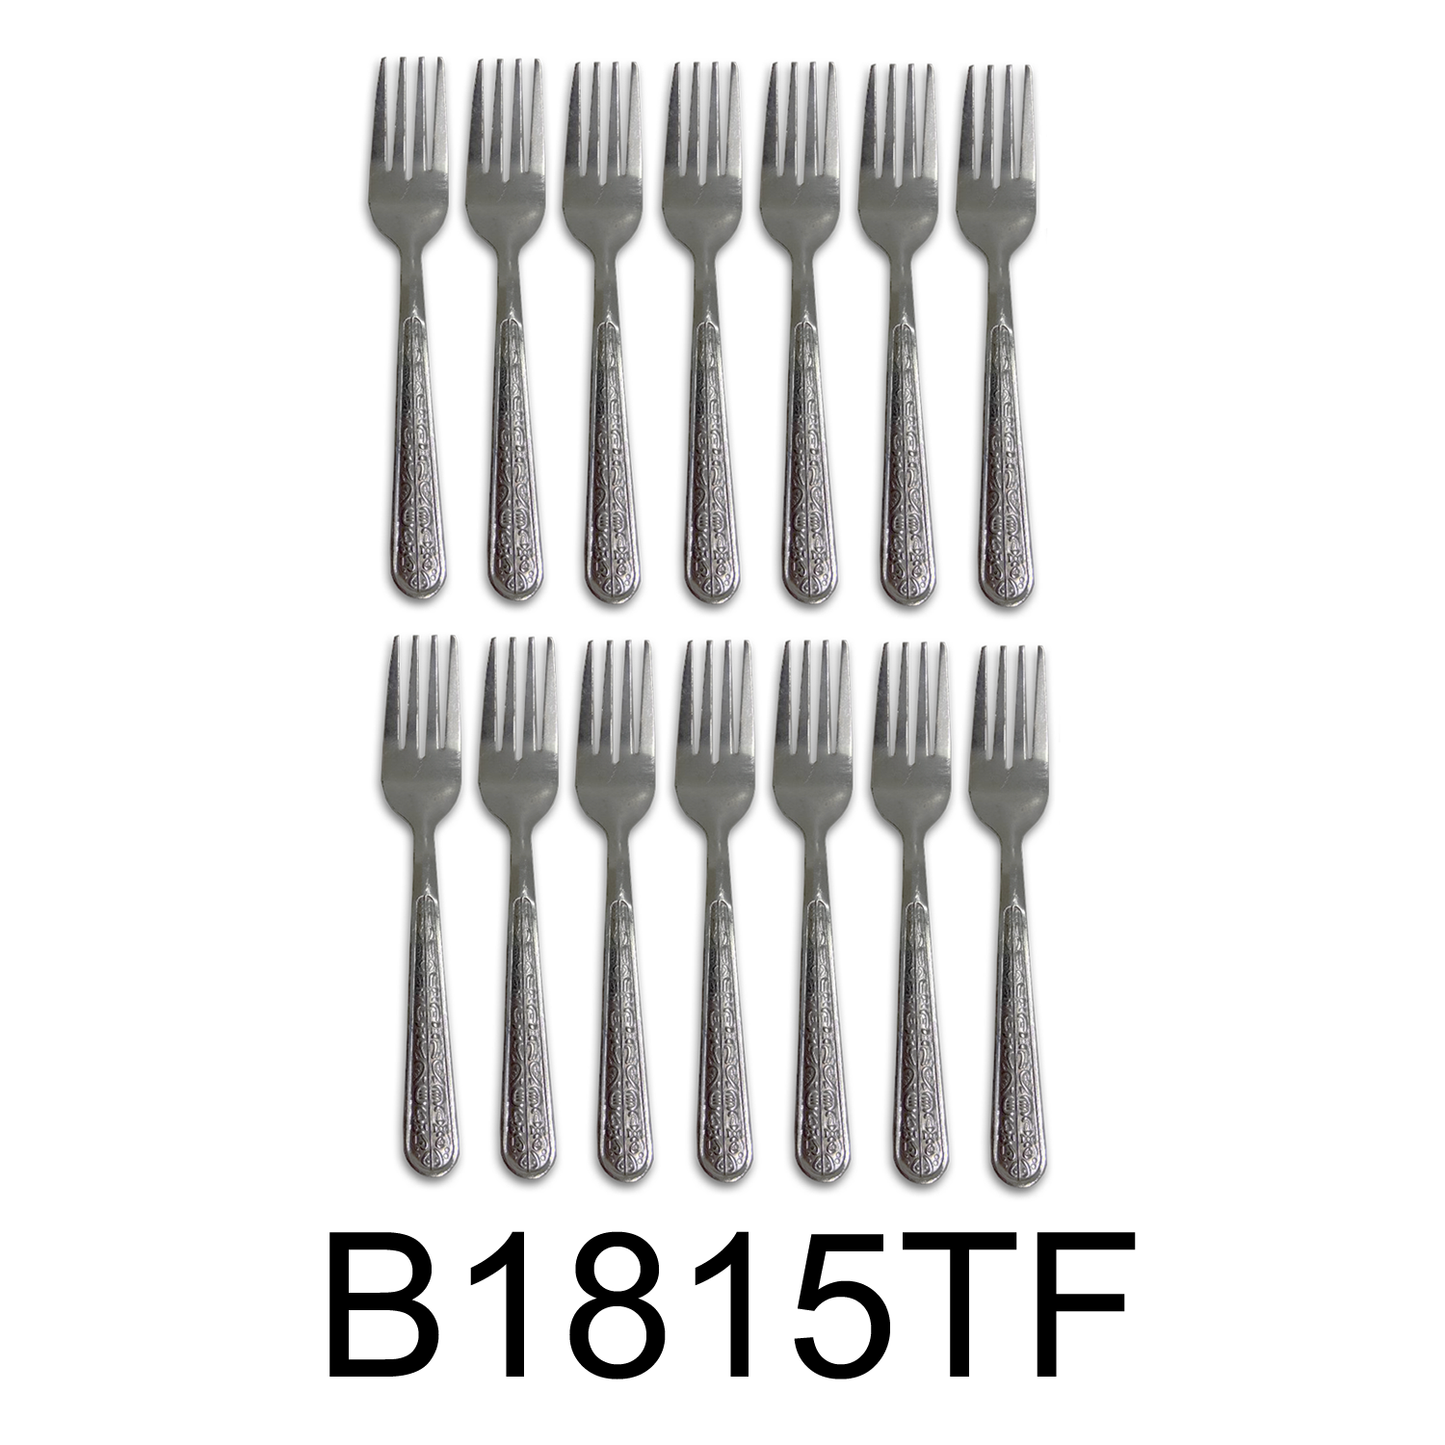 12 PC Classy Stainless Steel Silver Tea Fork